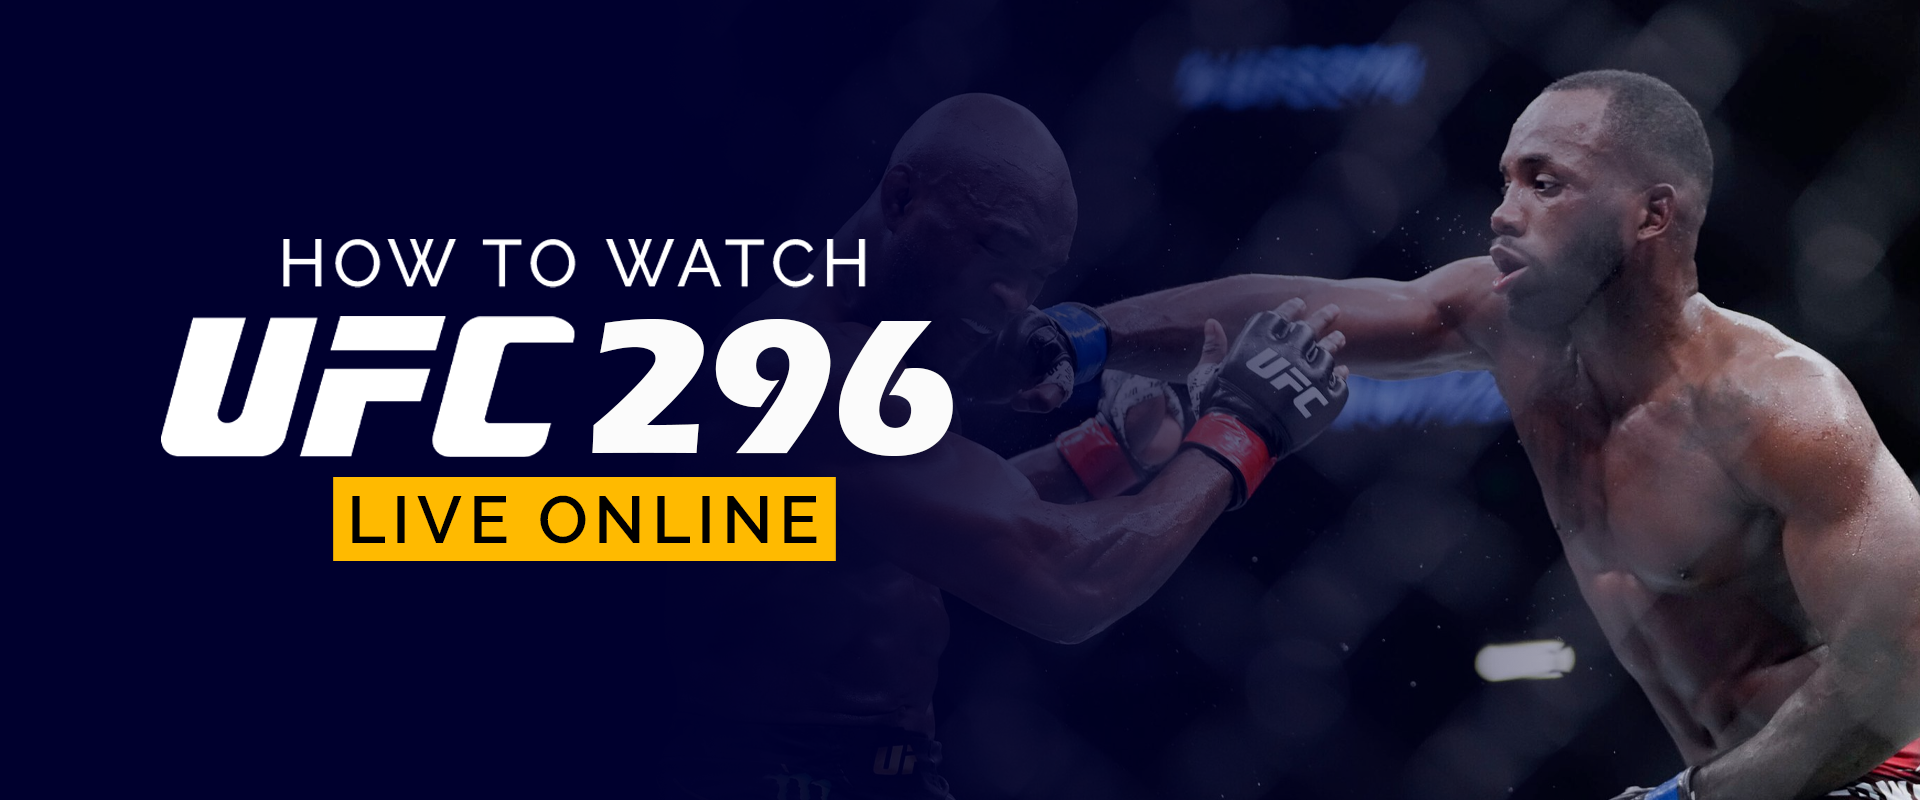 How to Watch UFC 296 Live Online